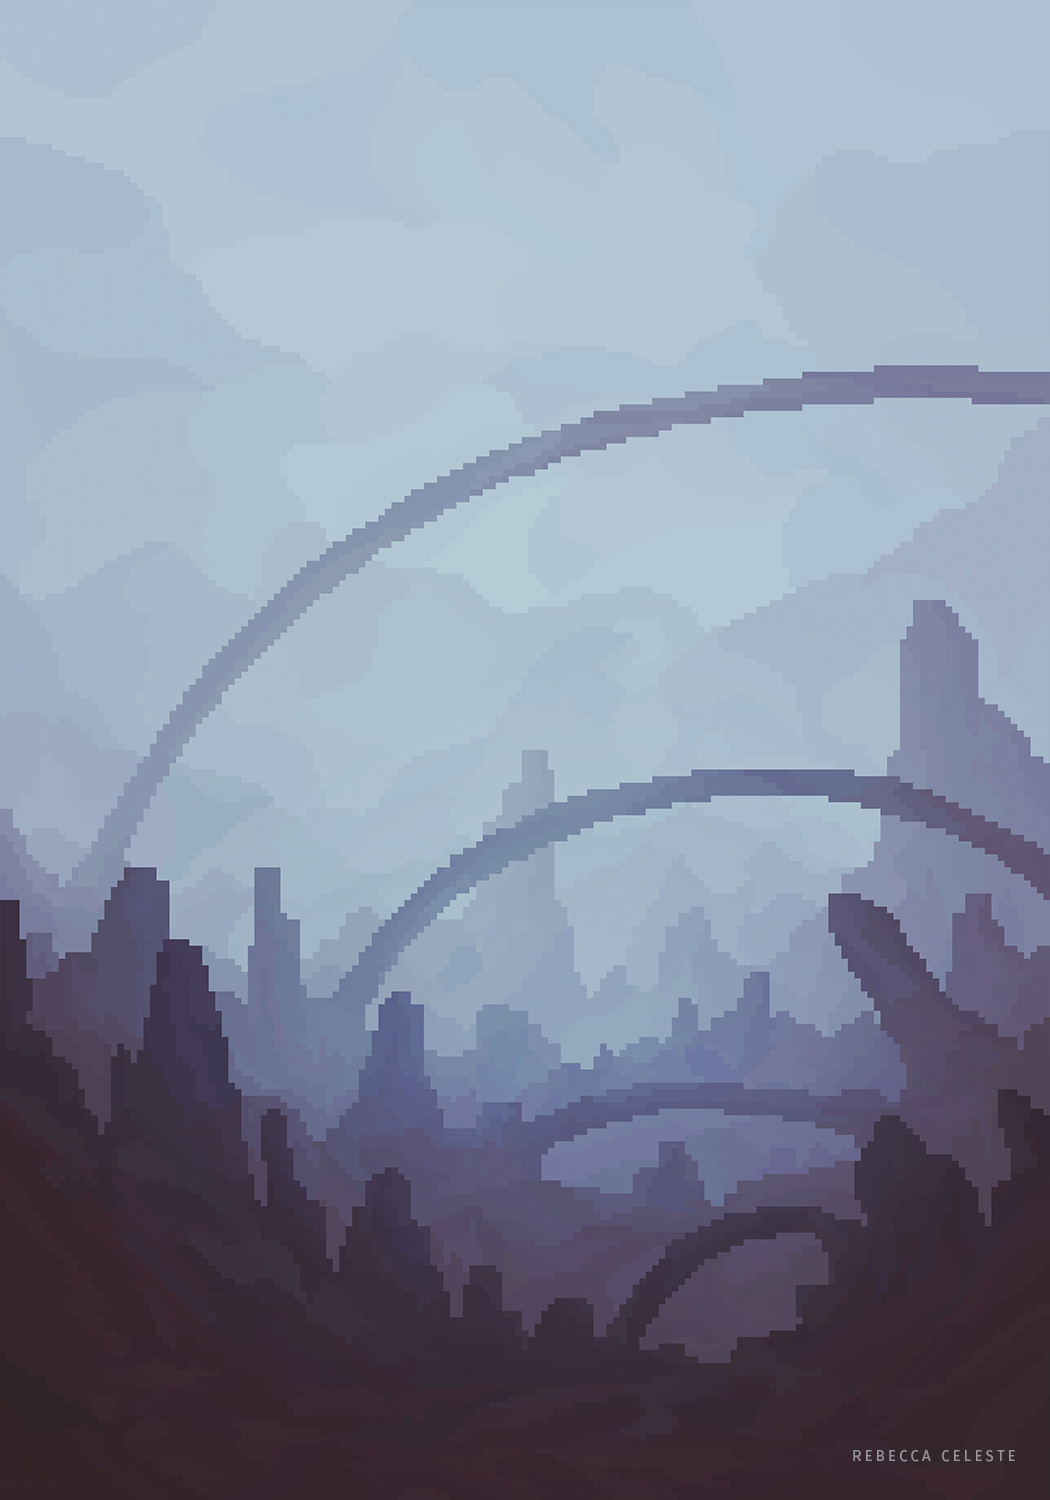 Landscape with big arcs in Pixel Art Style